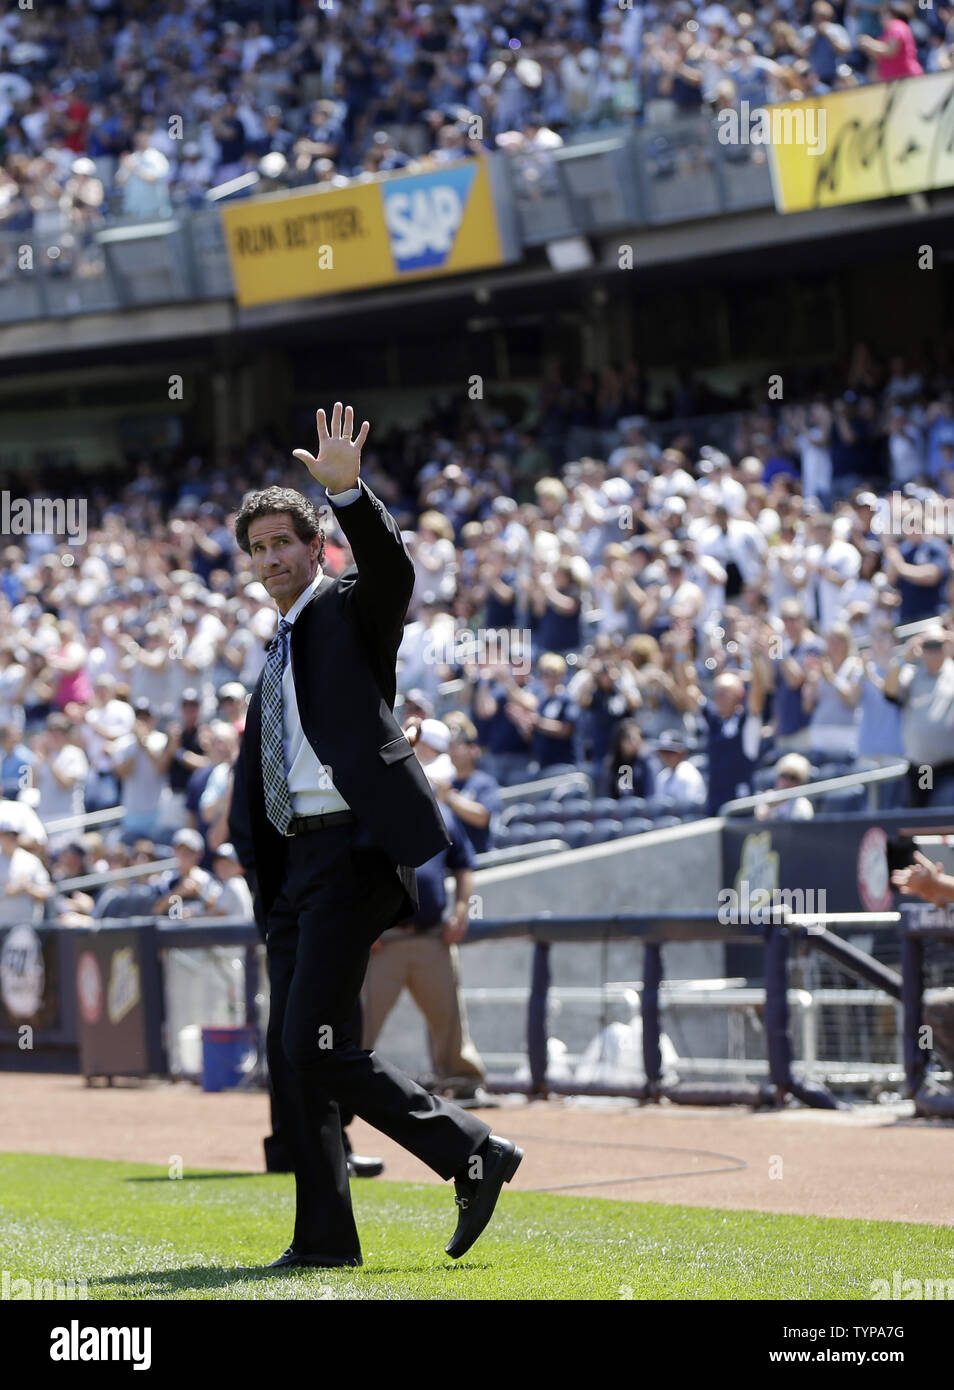 Retired New York Yankees player Paul O'Neill waves to fans before speaking at a ceremony inducting O'Neill into Monument Park with a  new plaque before the game against the Cleveland Indians at Yankee Stadium in New York City on August 9, 2014. Monument Park is an open-air museum located at the new Yankee Stadium containing a collection of monuments, plaques, and retired numbers honoring distinguished members of the New York Yankees.    UPI/John Angelillo Stock Photo